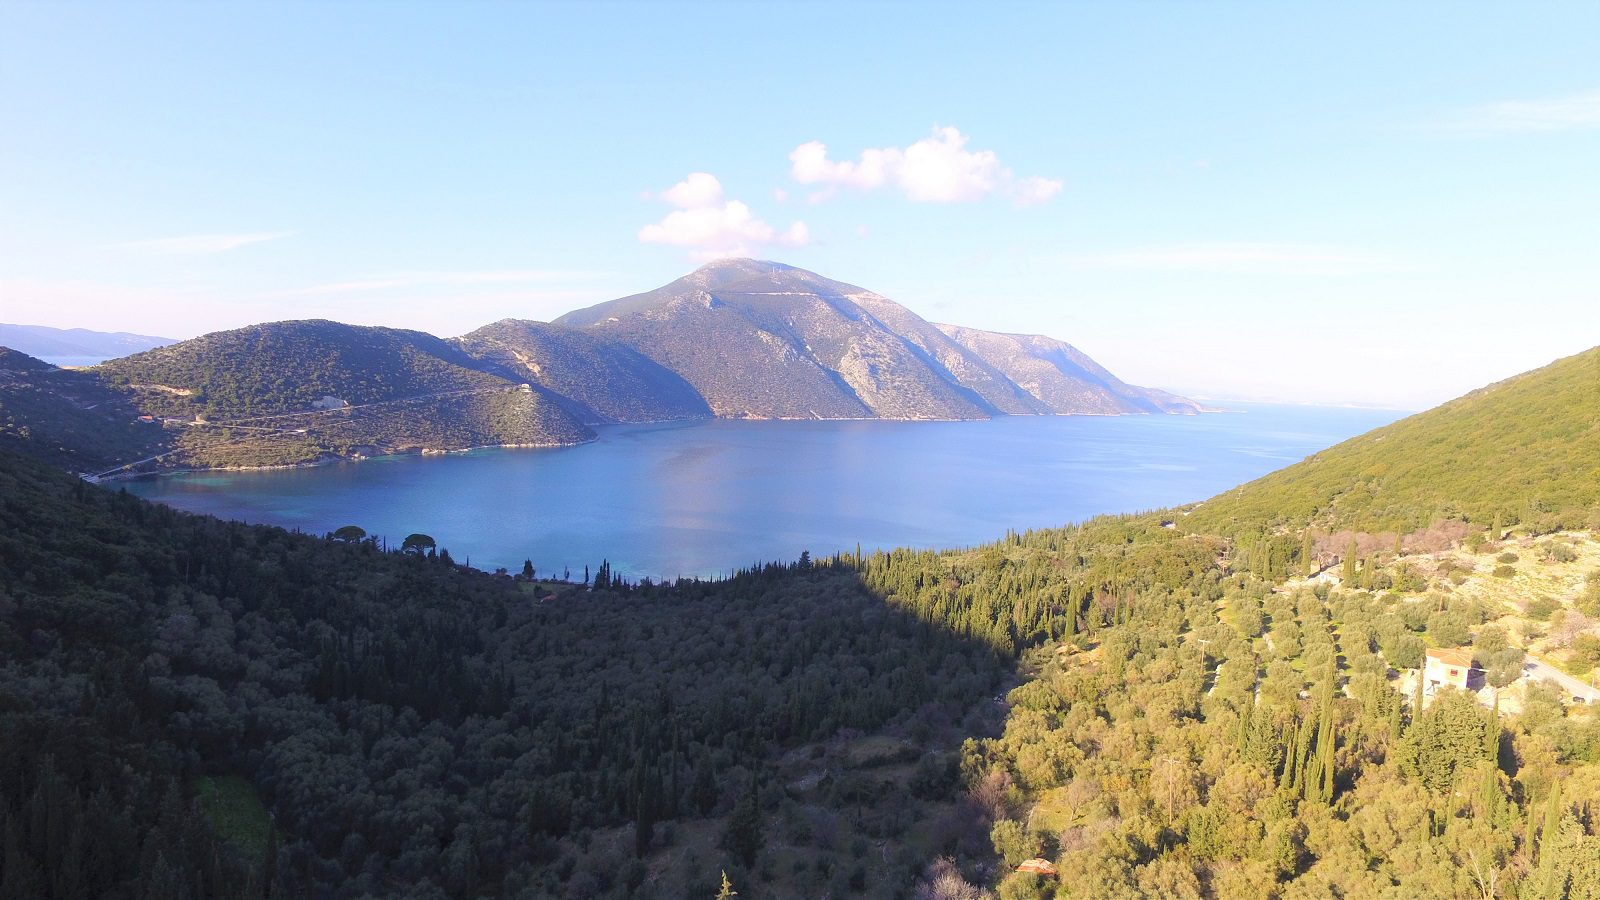 Aerial views of land for sale on Ithaca Greece, Piso Aetos